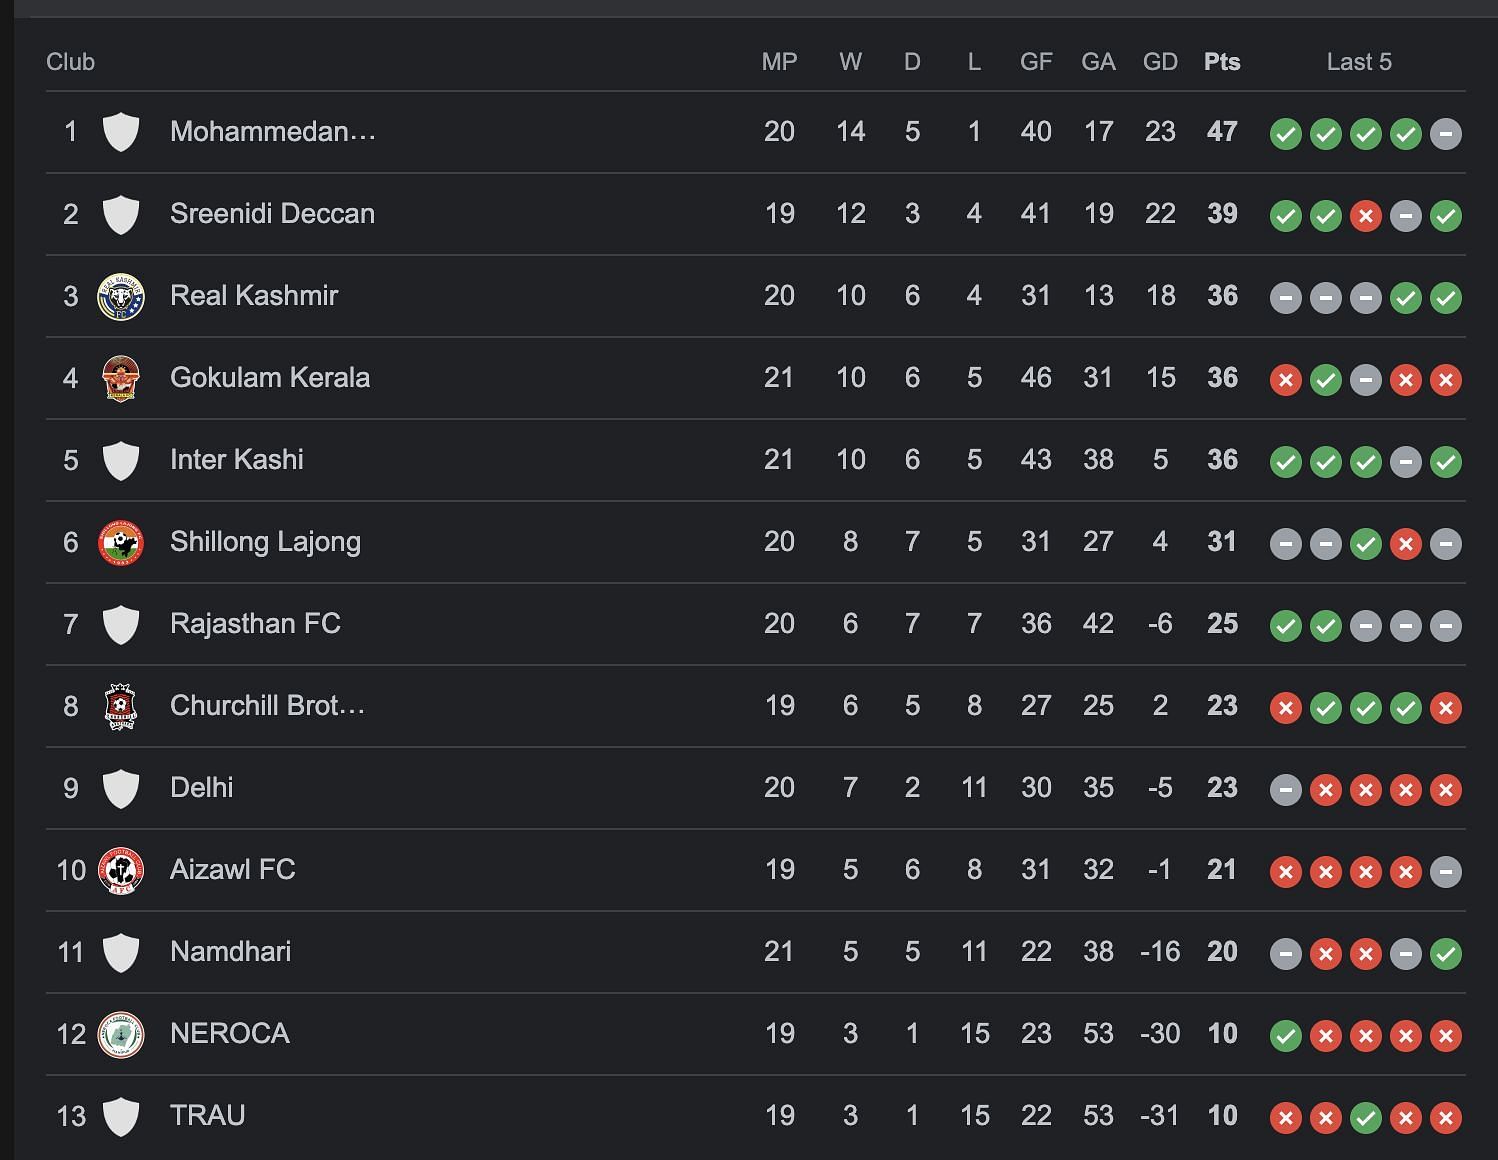 A look at the standings after the conclusion of NEROCA vs TRAU game.